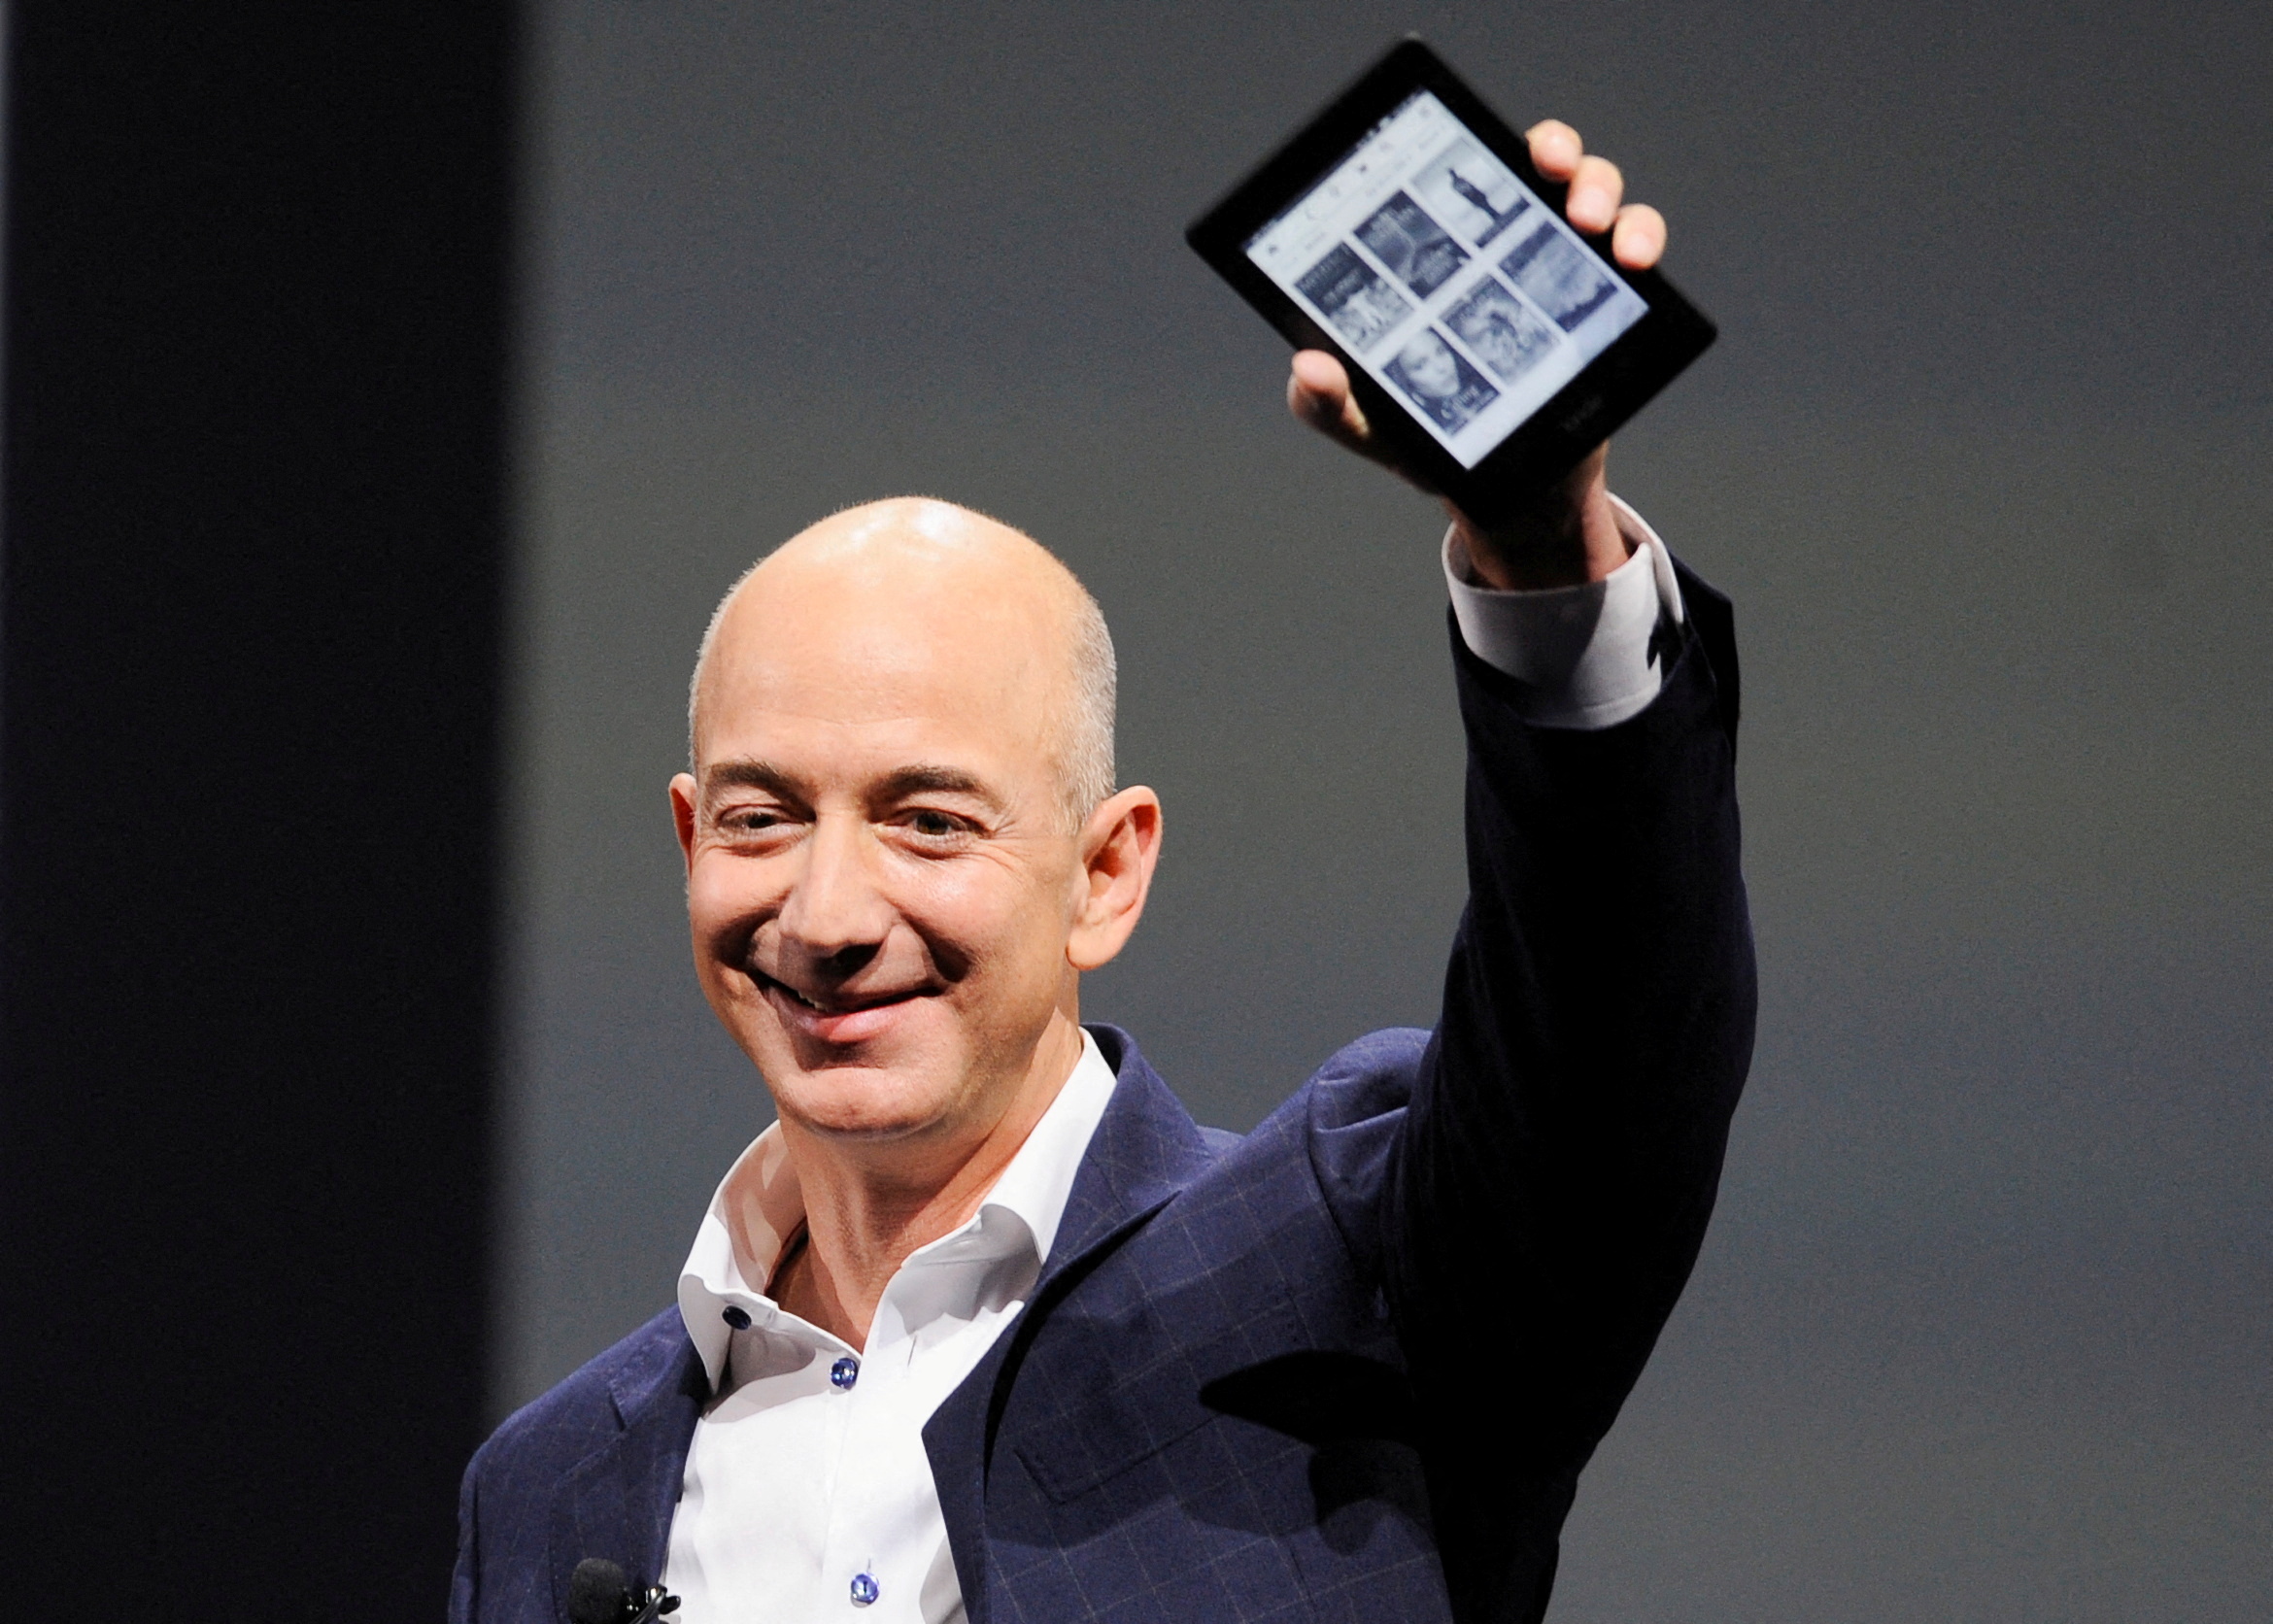 Amazon CEO Jeff Bezos holds up a Kindle Paperwhite during Amazon's Kindle Fire event in Santa Monica, California